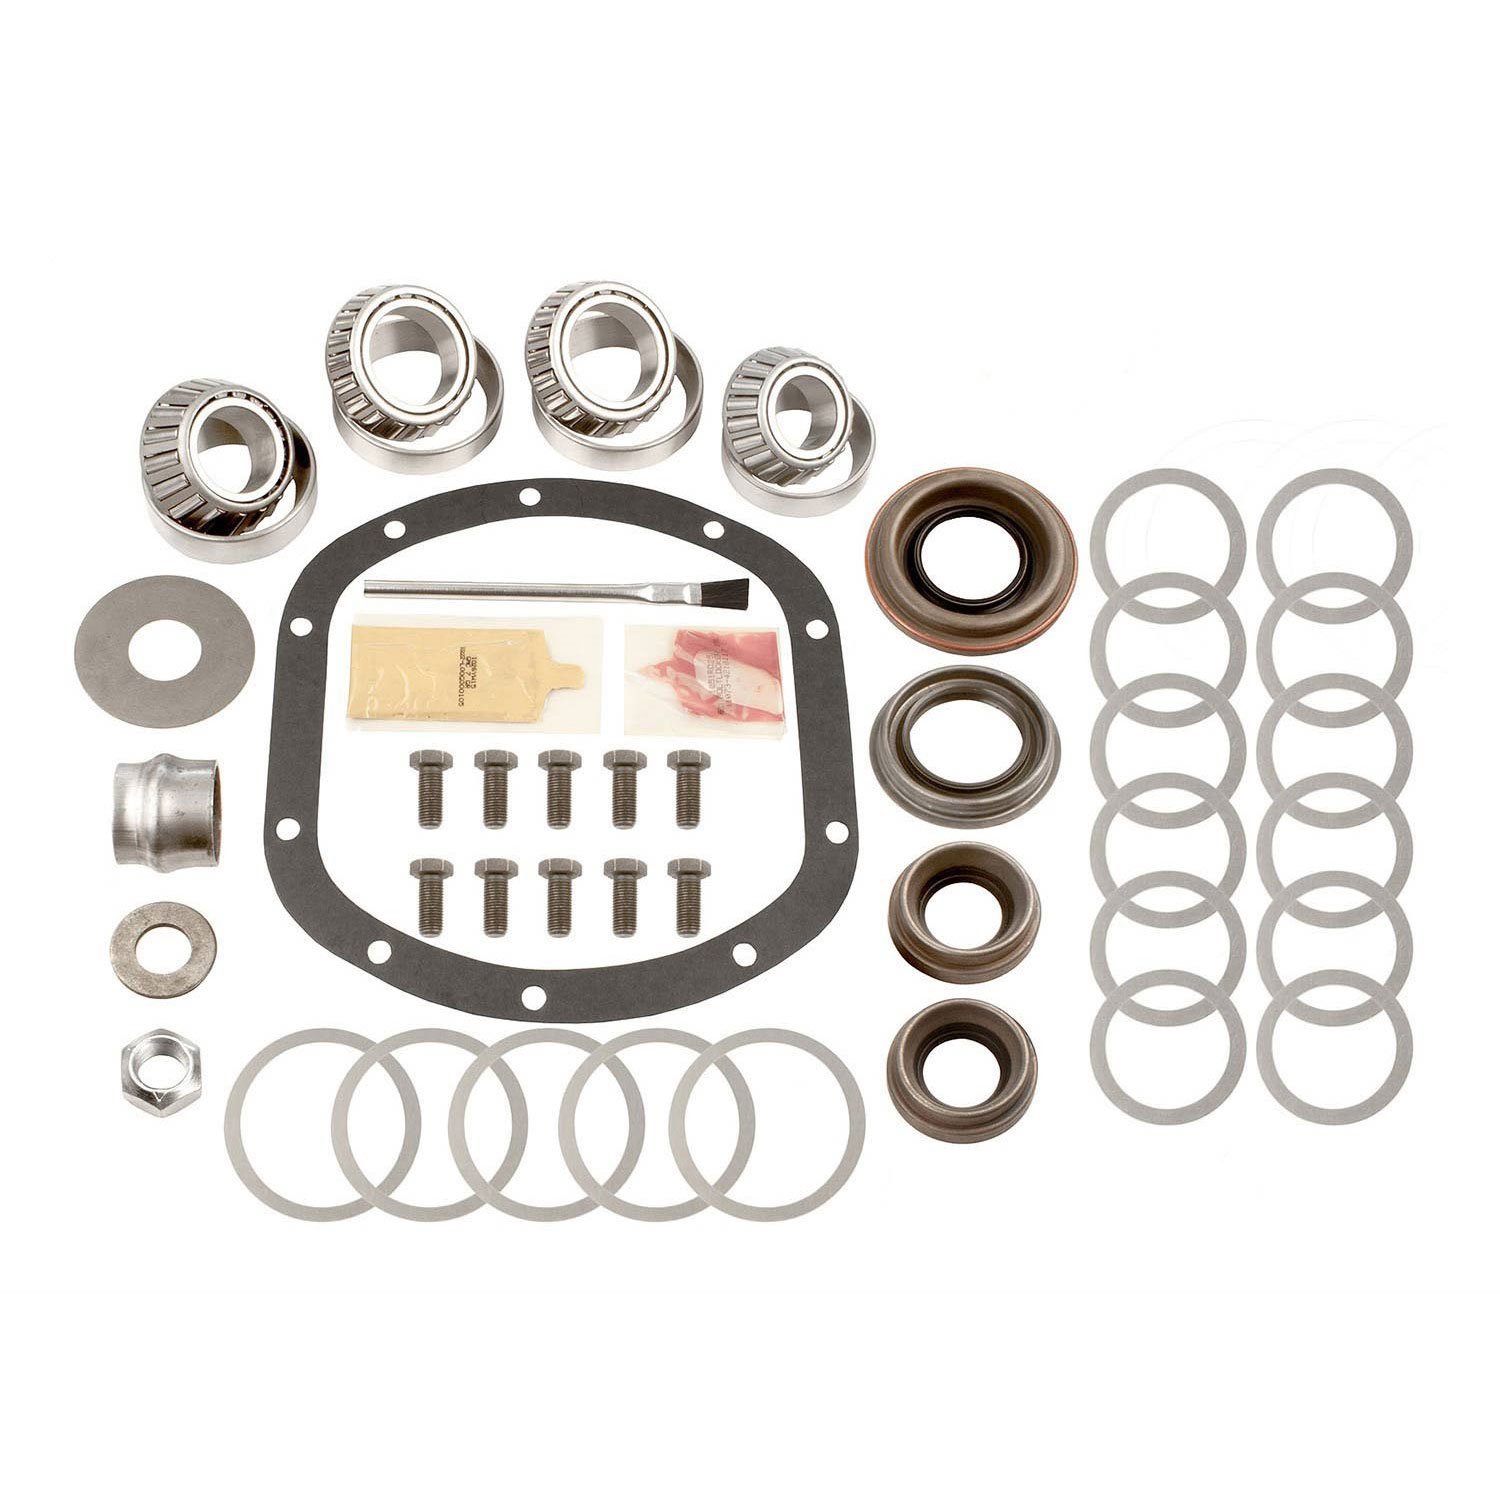 Master Installation Kit 1996-2006 Jeep TJ/WJ (Front) Includes: